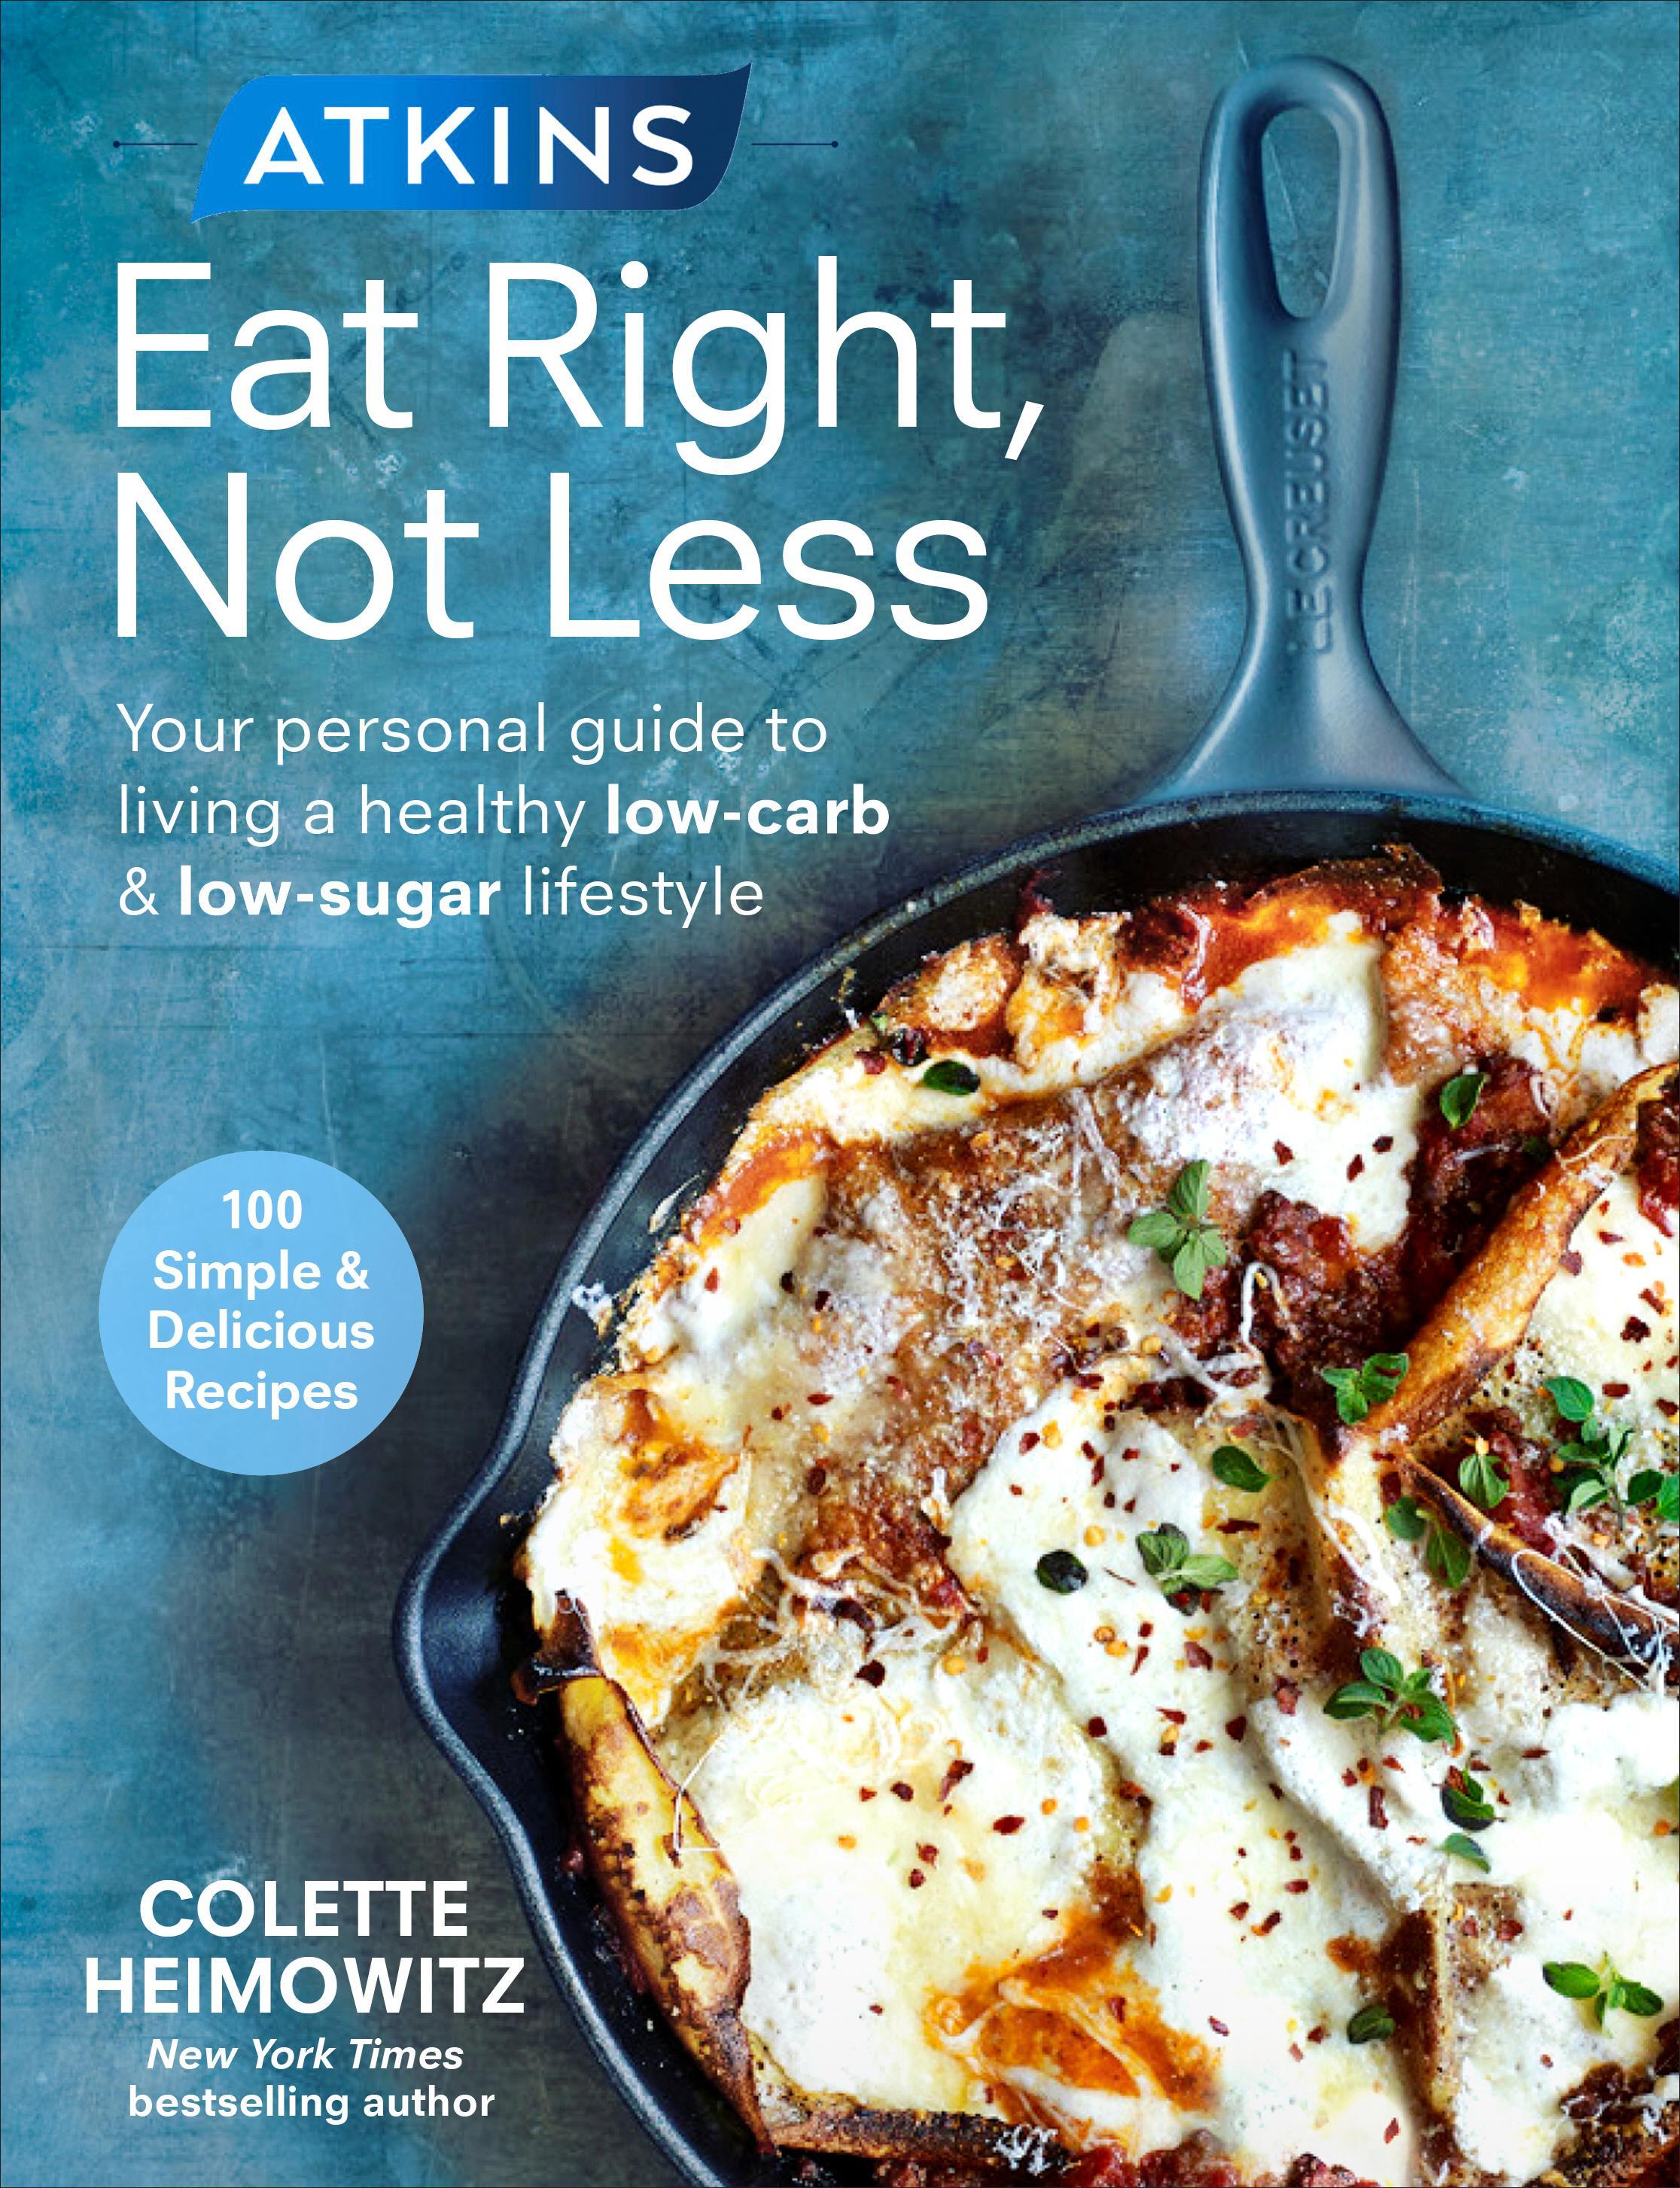 Atkins: Eat Right, Not Less - Colette Heimowitz